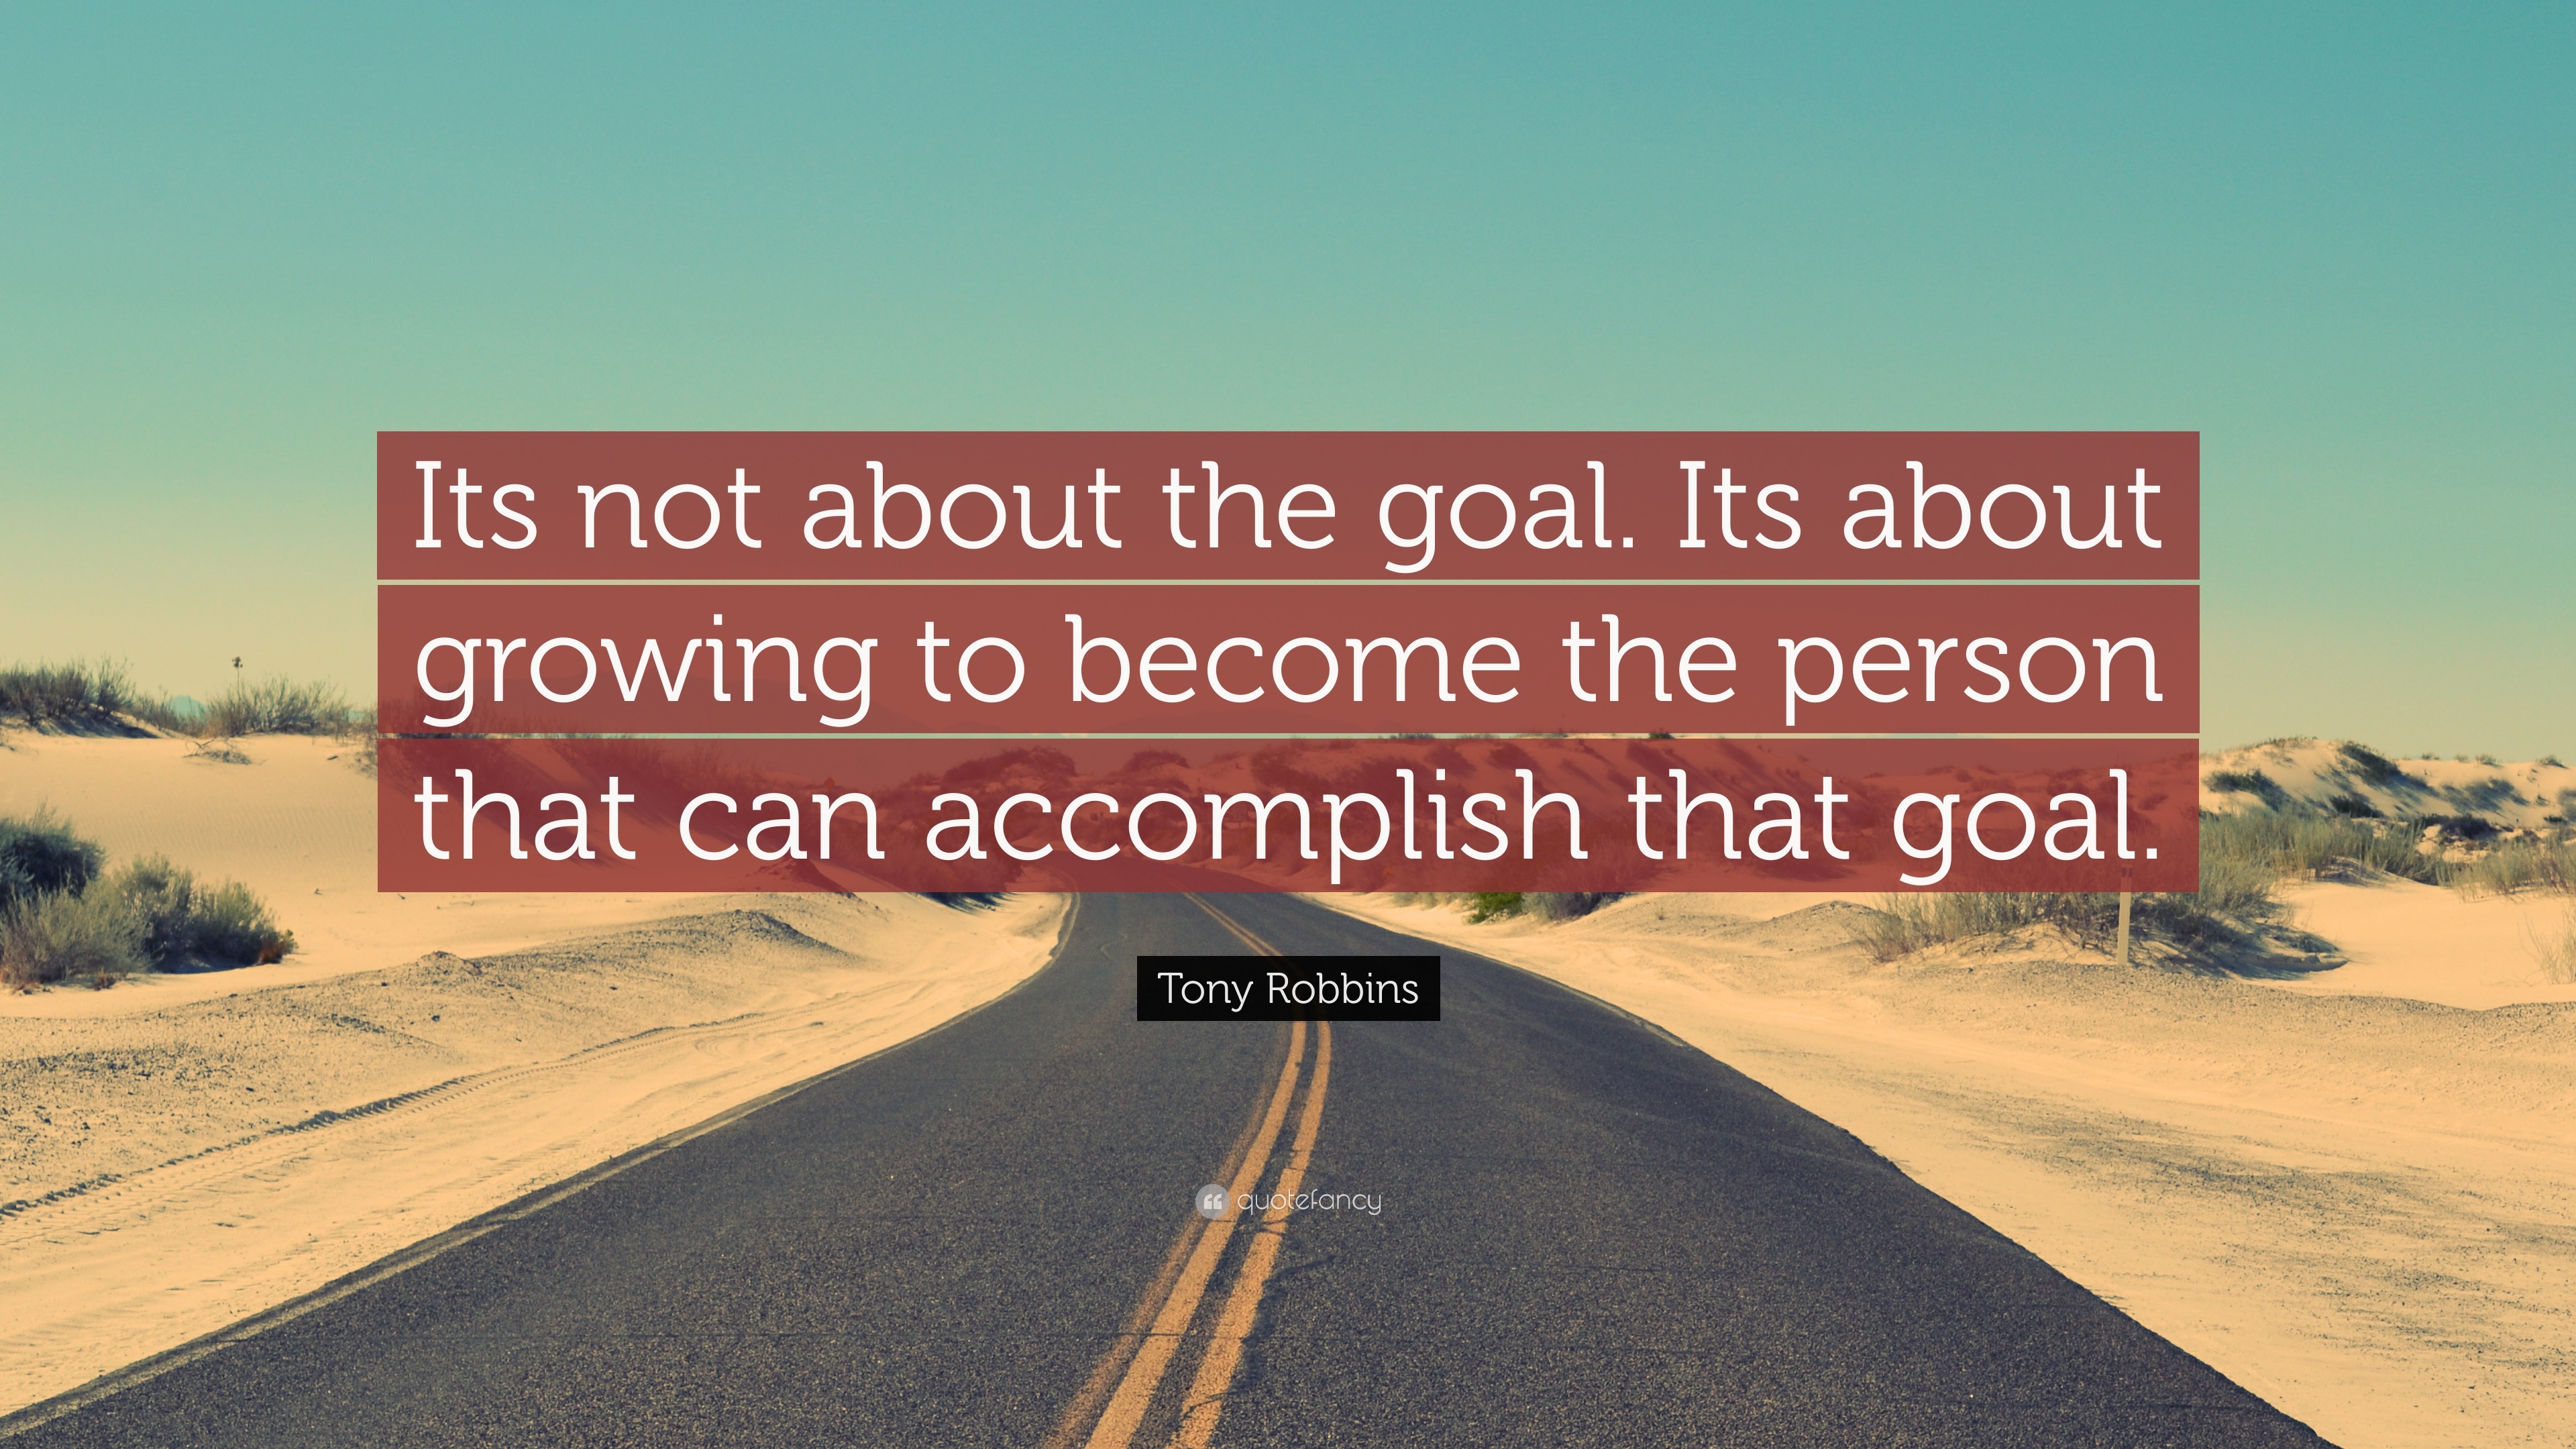 Tony Robbins Quote: “Its not about the goal. Its about growing to ...